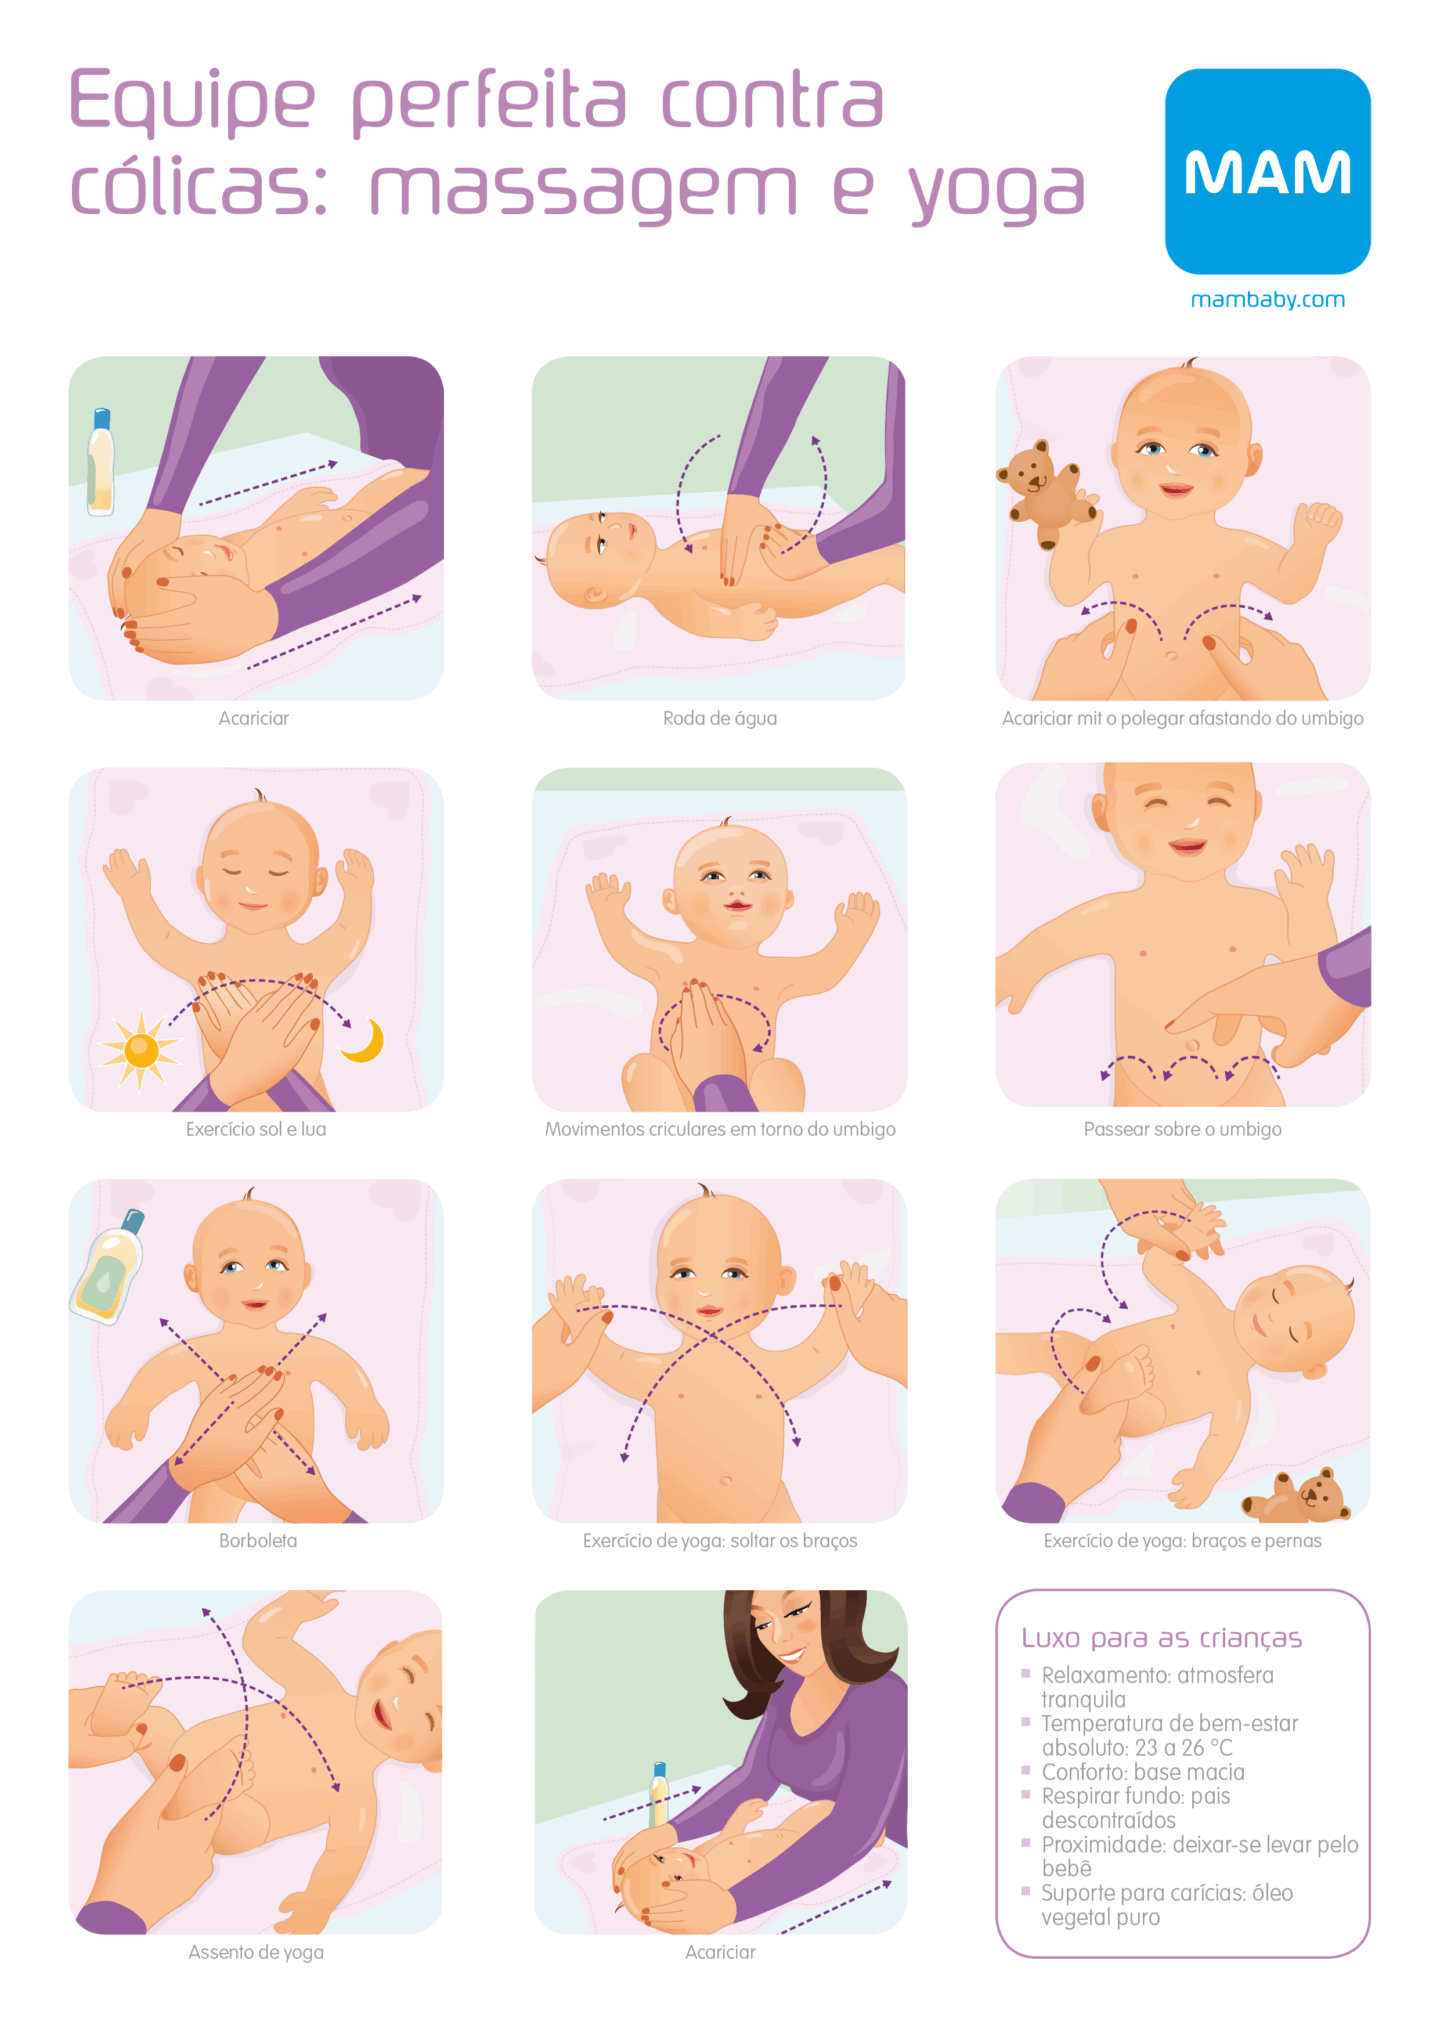 Portuguese information sheet about baby massage and baby yoga to relieve colic